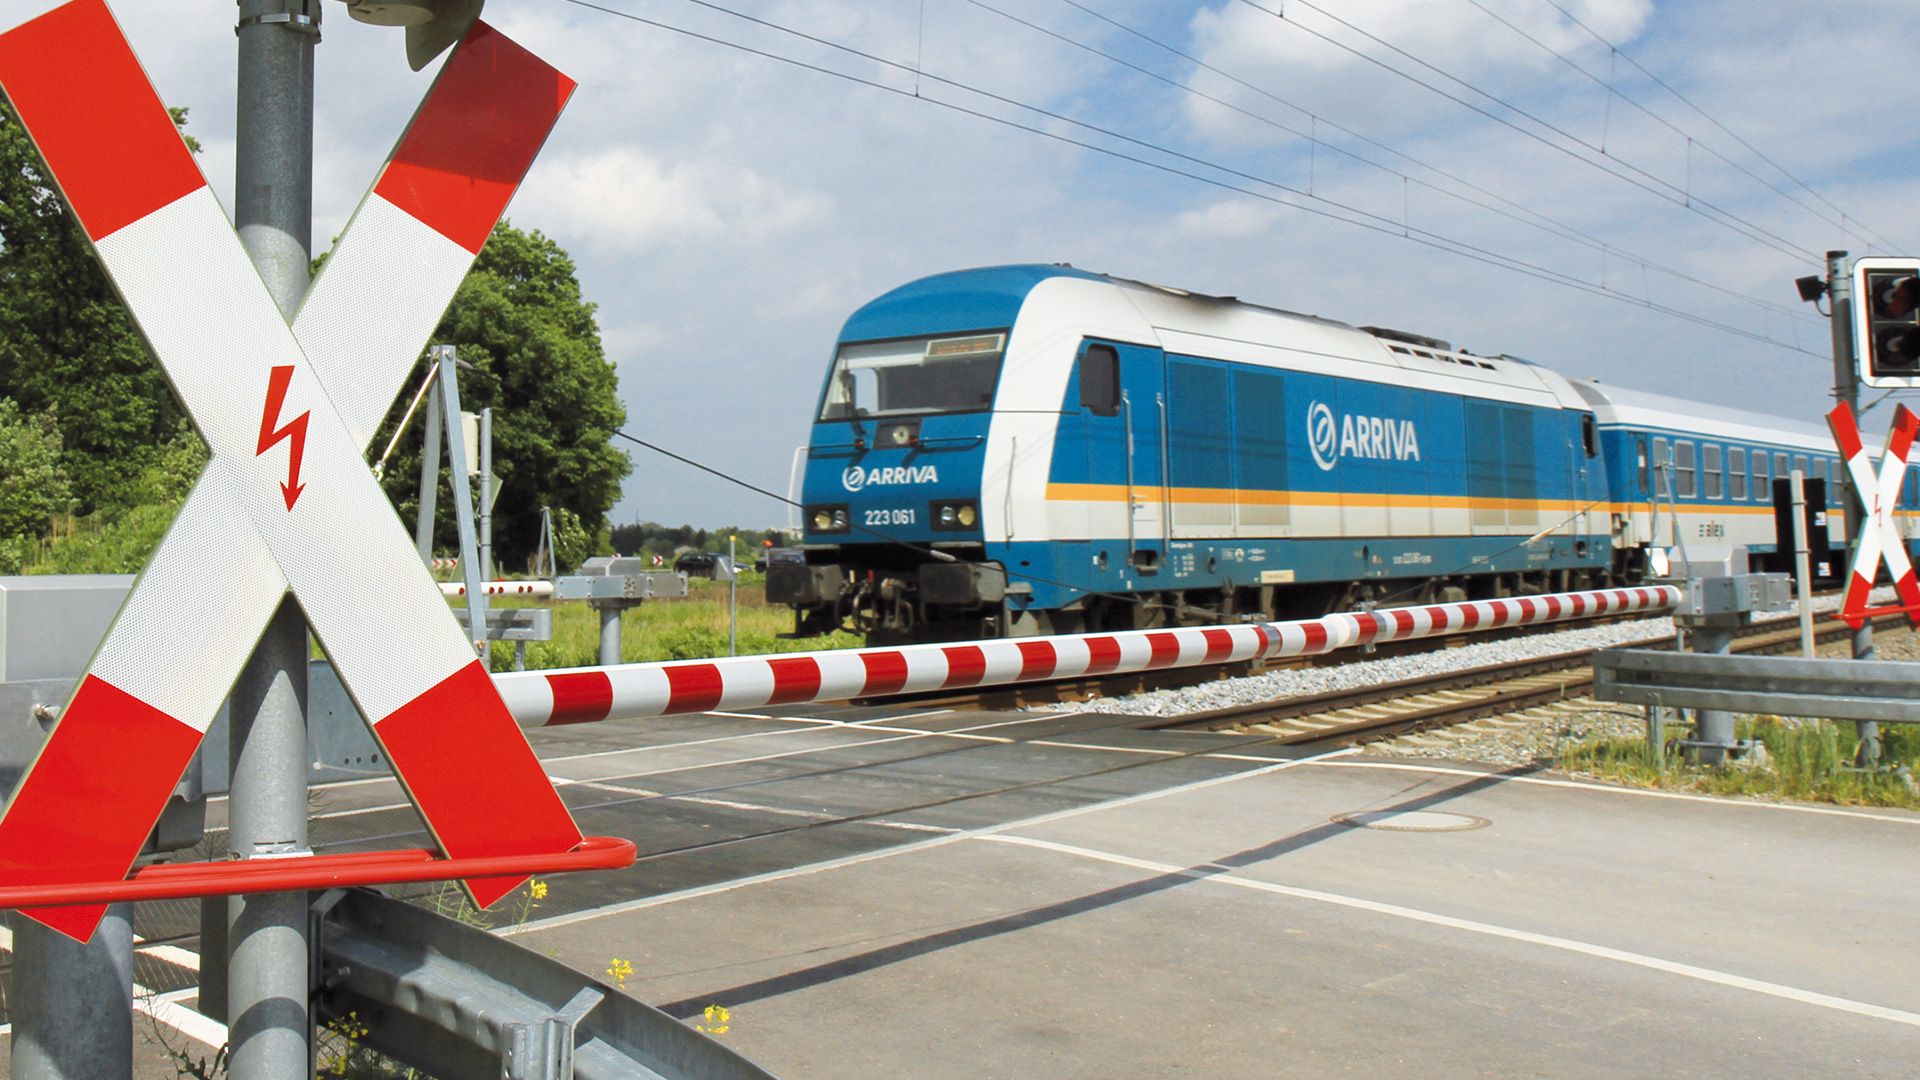 Crossings Protection Crossings Overview Siemens Mobility Global